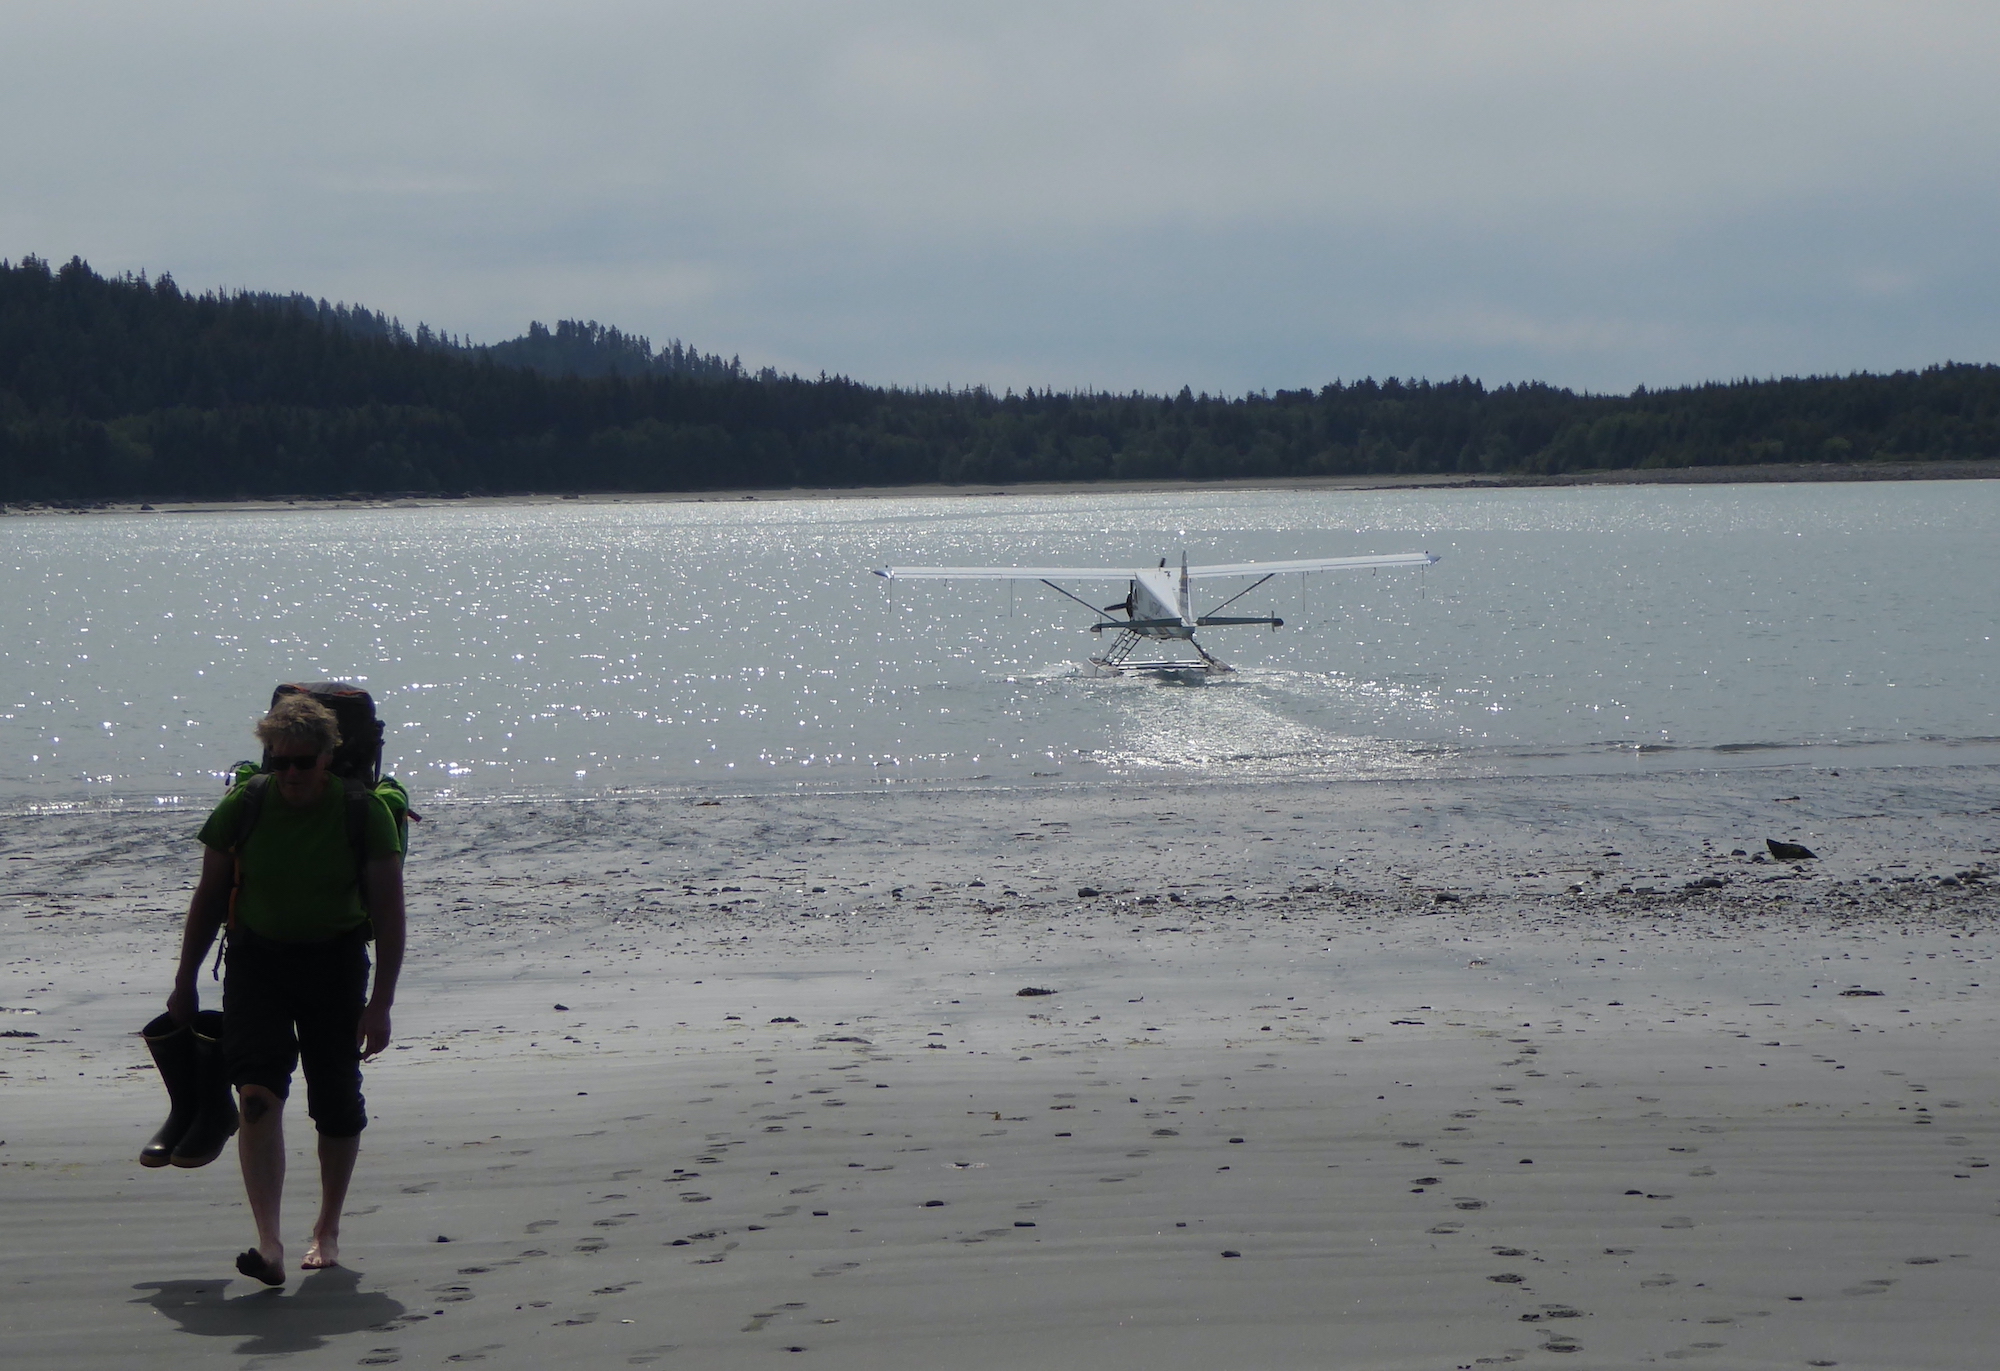 A barefoot man walks up a beach while a floatplane leaves the shoreline behind him.